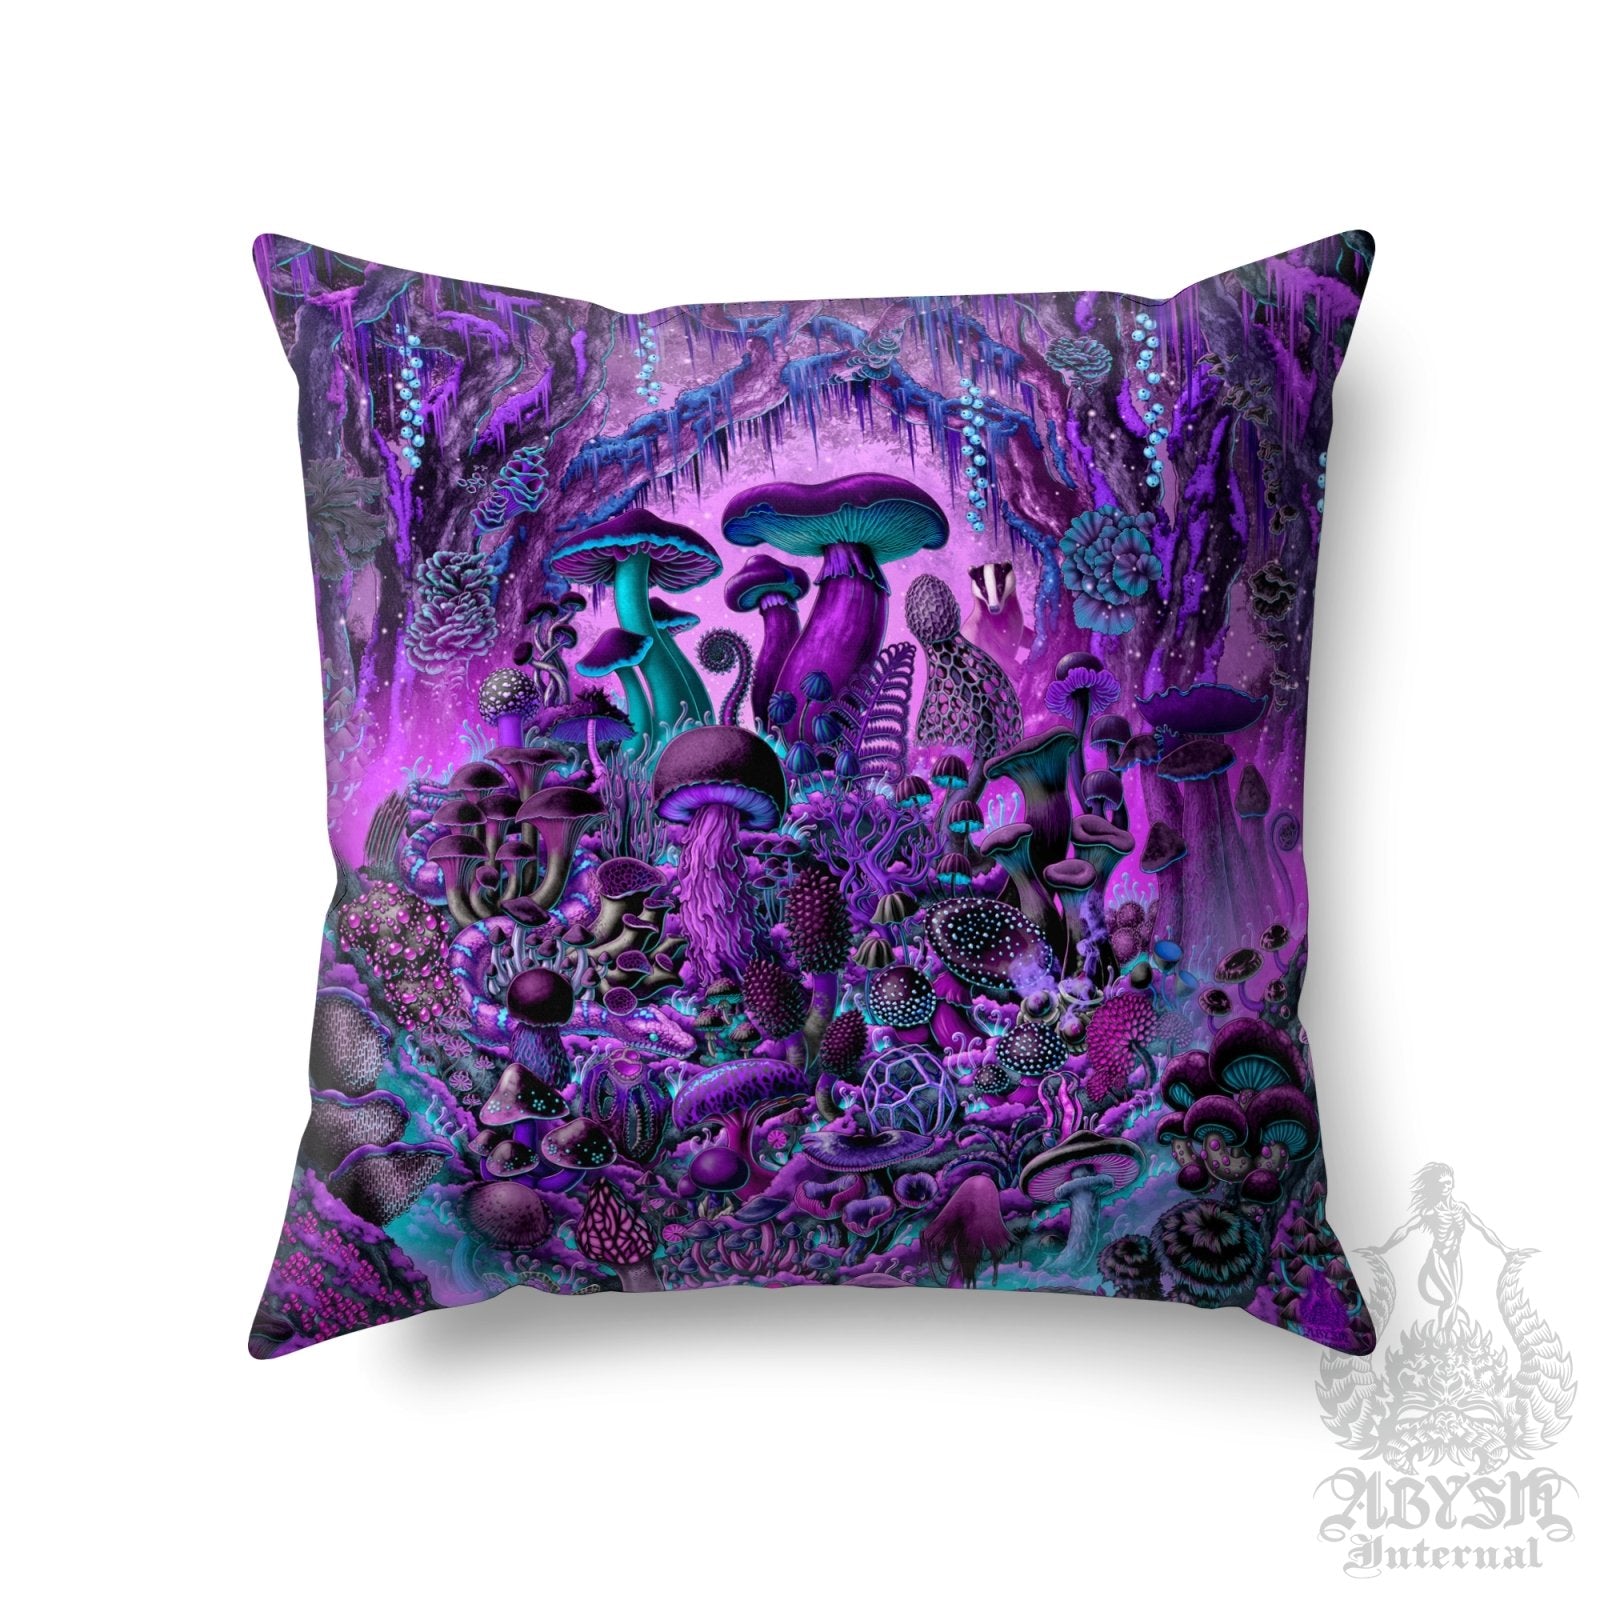 Gothic Mushrooms Throw Pillow, Decorative Accent Cushion, Witchy Room Decor, Magic Shrooms, Pastel Goth Art Print - Abysm Internal